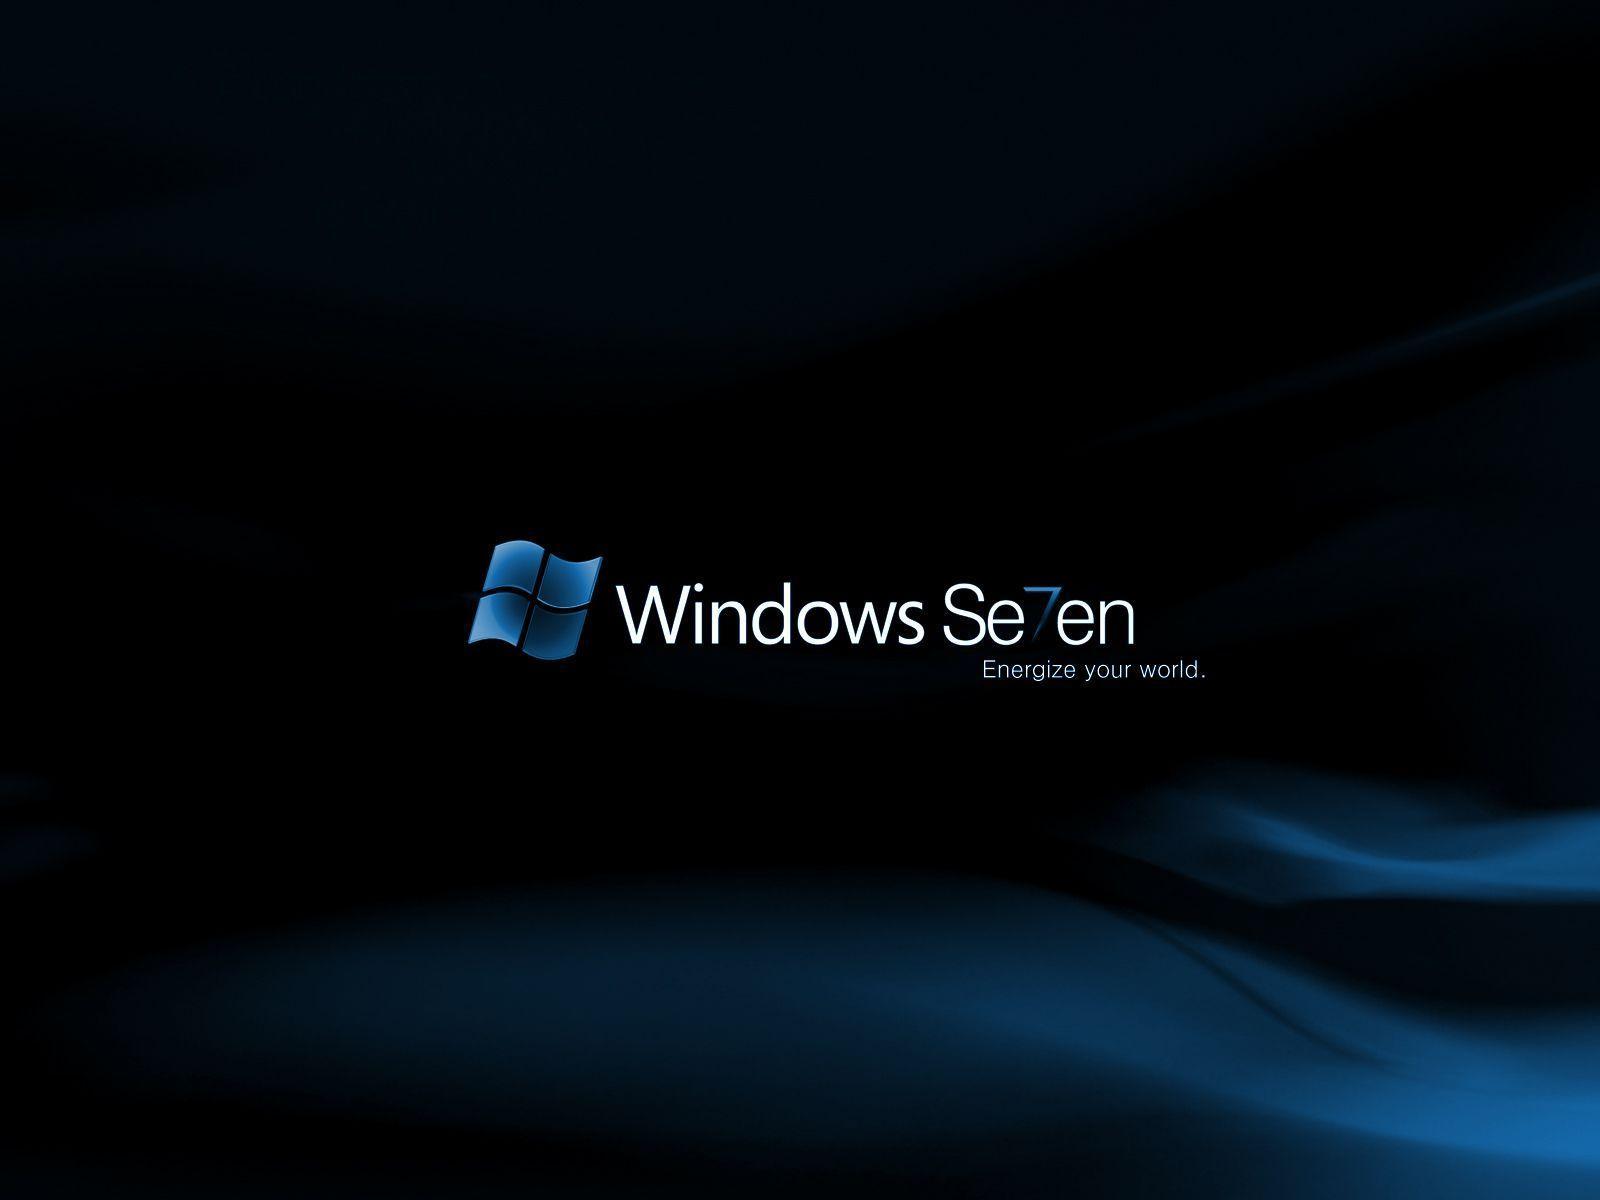 Microsoft windows 7 wallpaper and image, picture